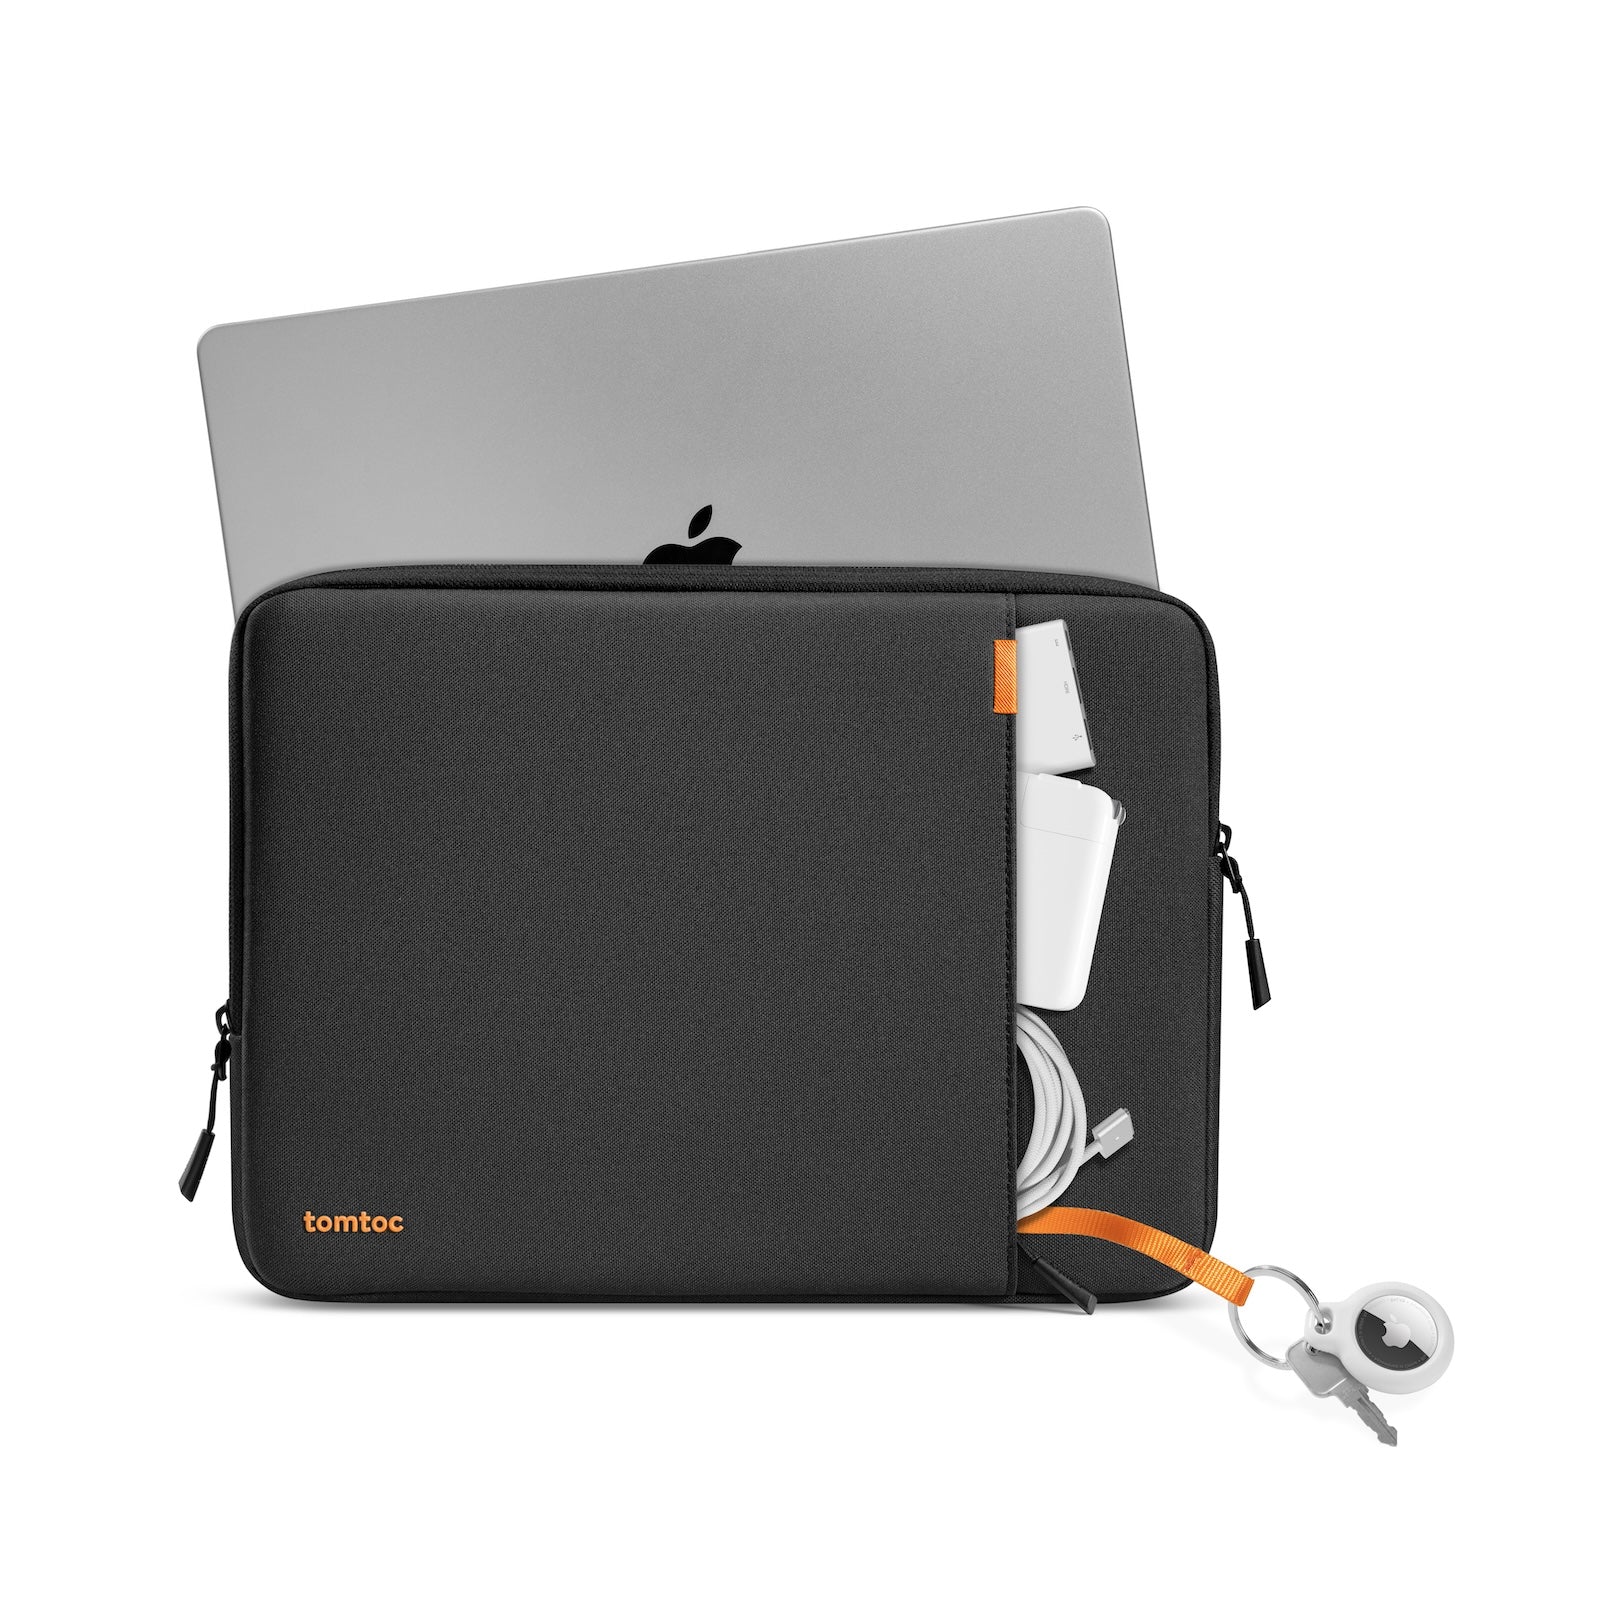 tomtoc Defender A13 Laptop Sleeve - 13inch